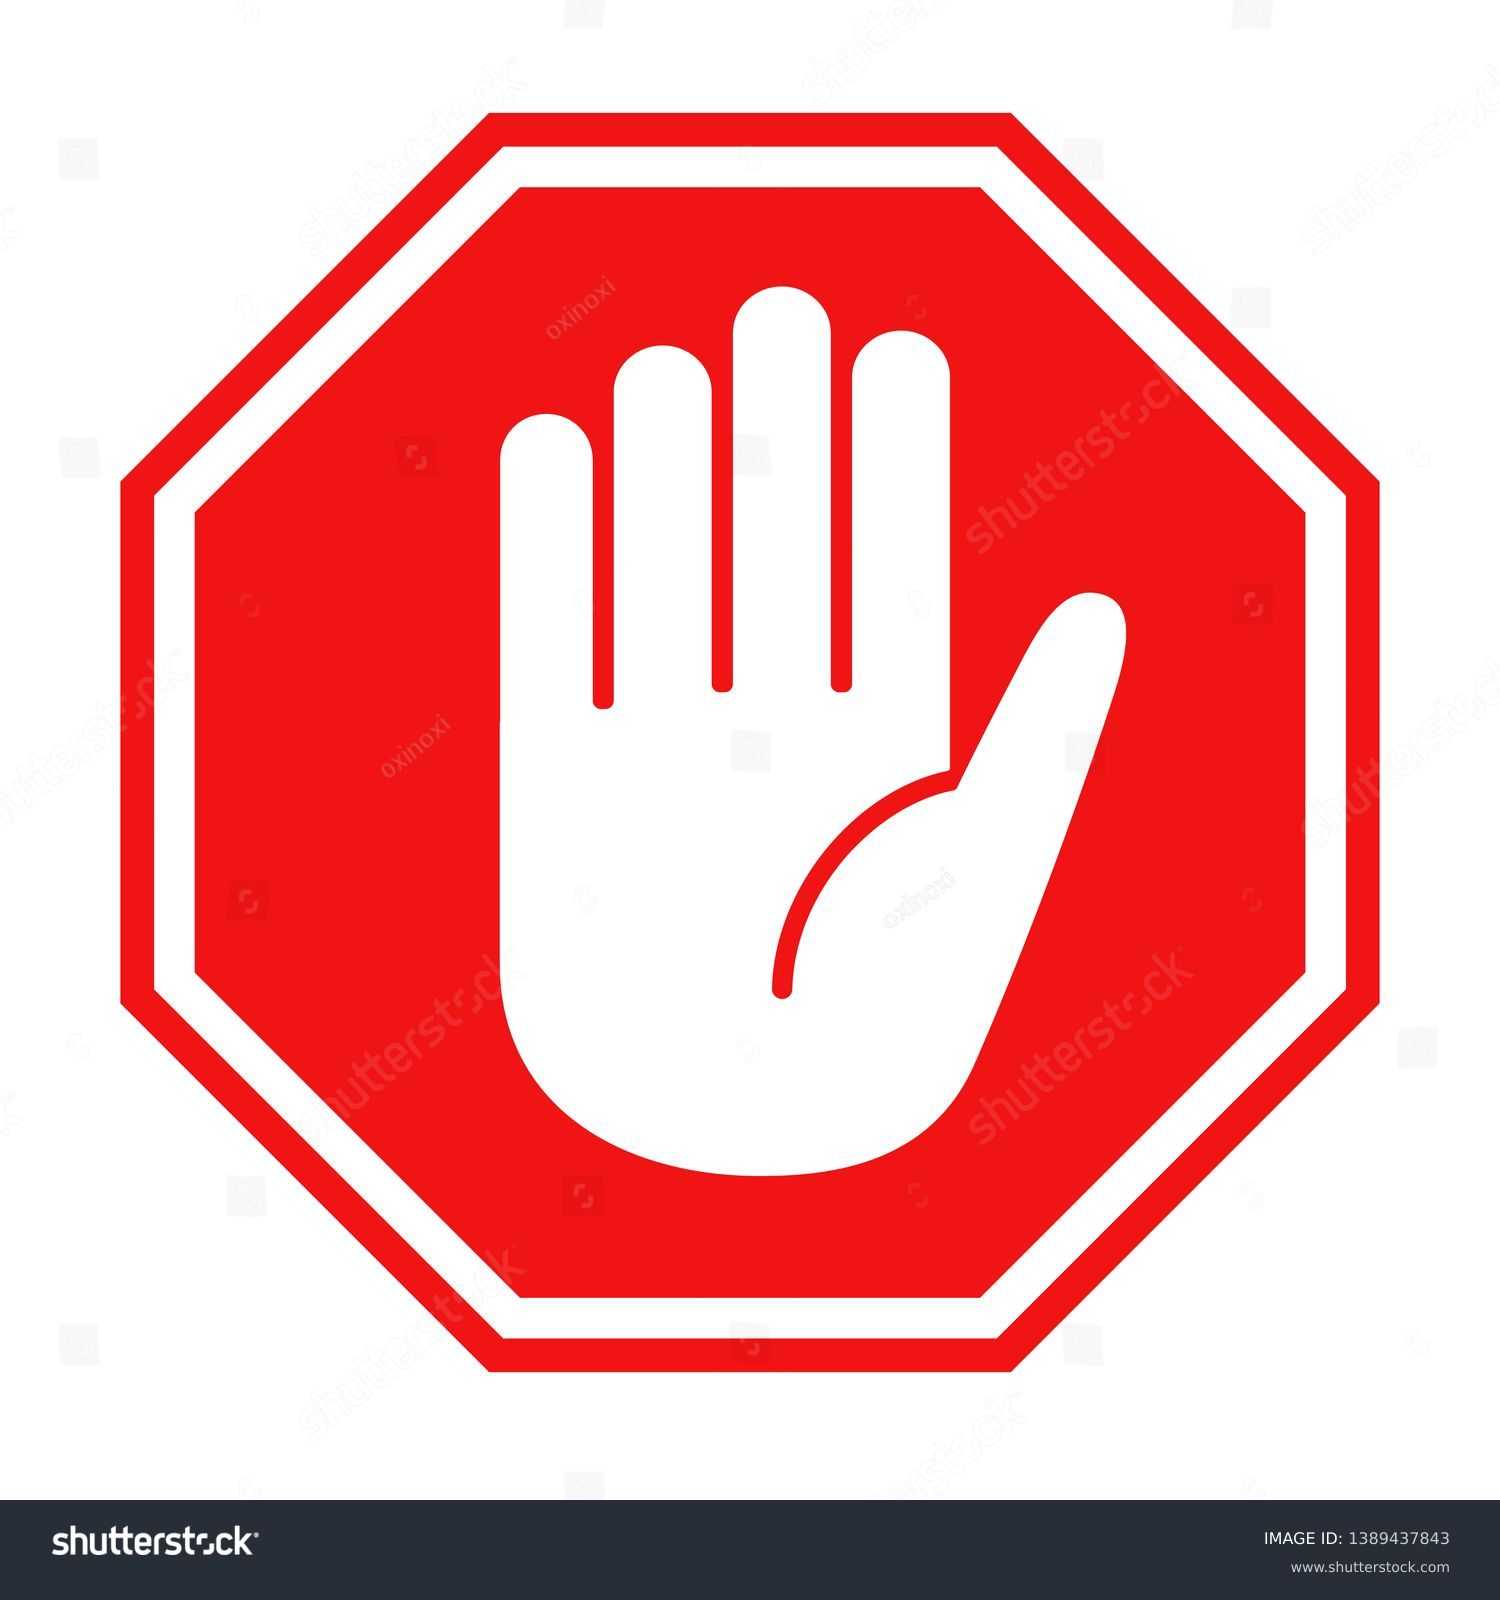 Simple red stop roadsign with big hand symbol or icon vector illustration #1389437843